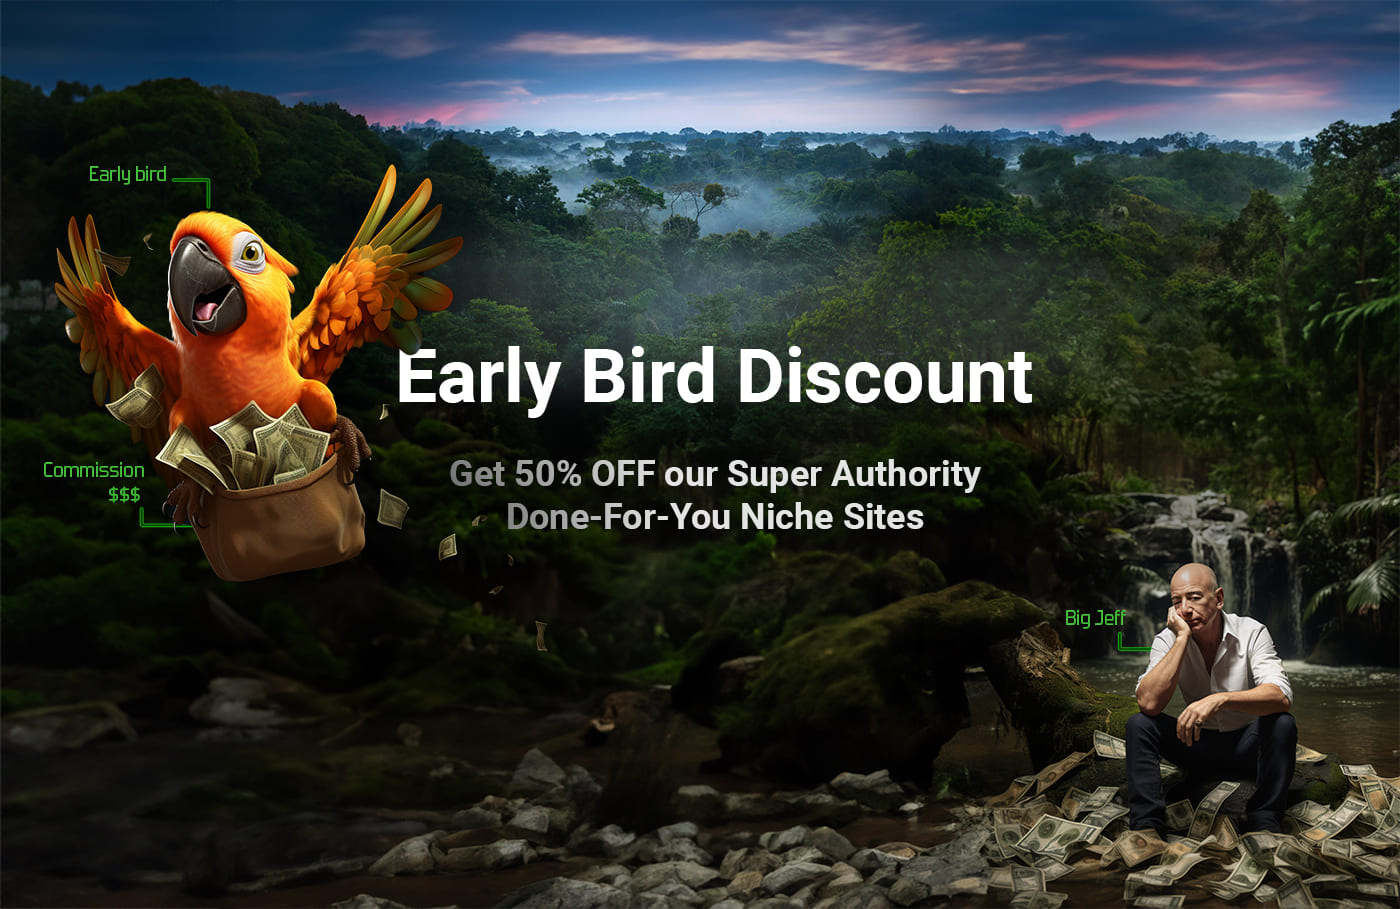 Early bird discount on niche sites